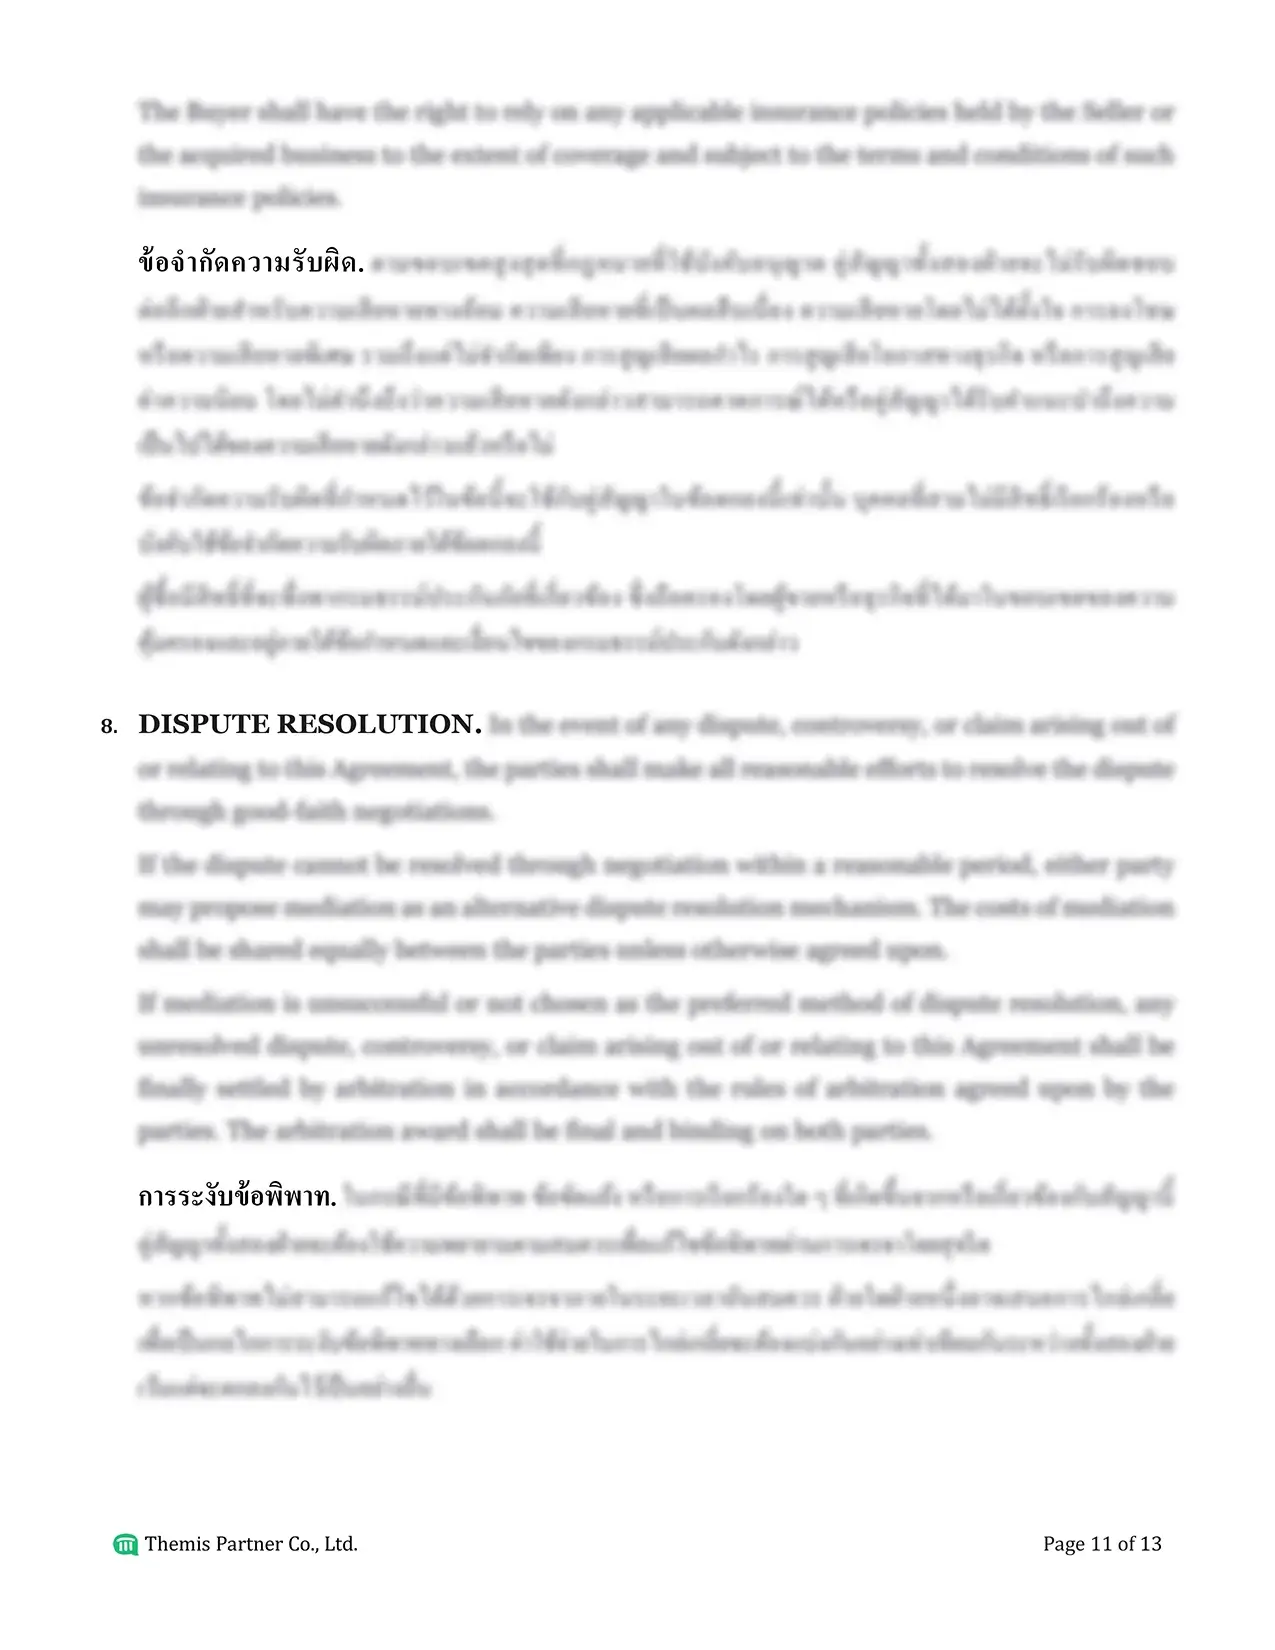 Business purchase agreement Thailand 11